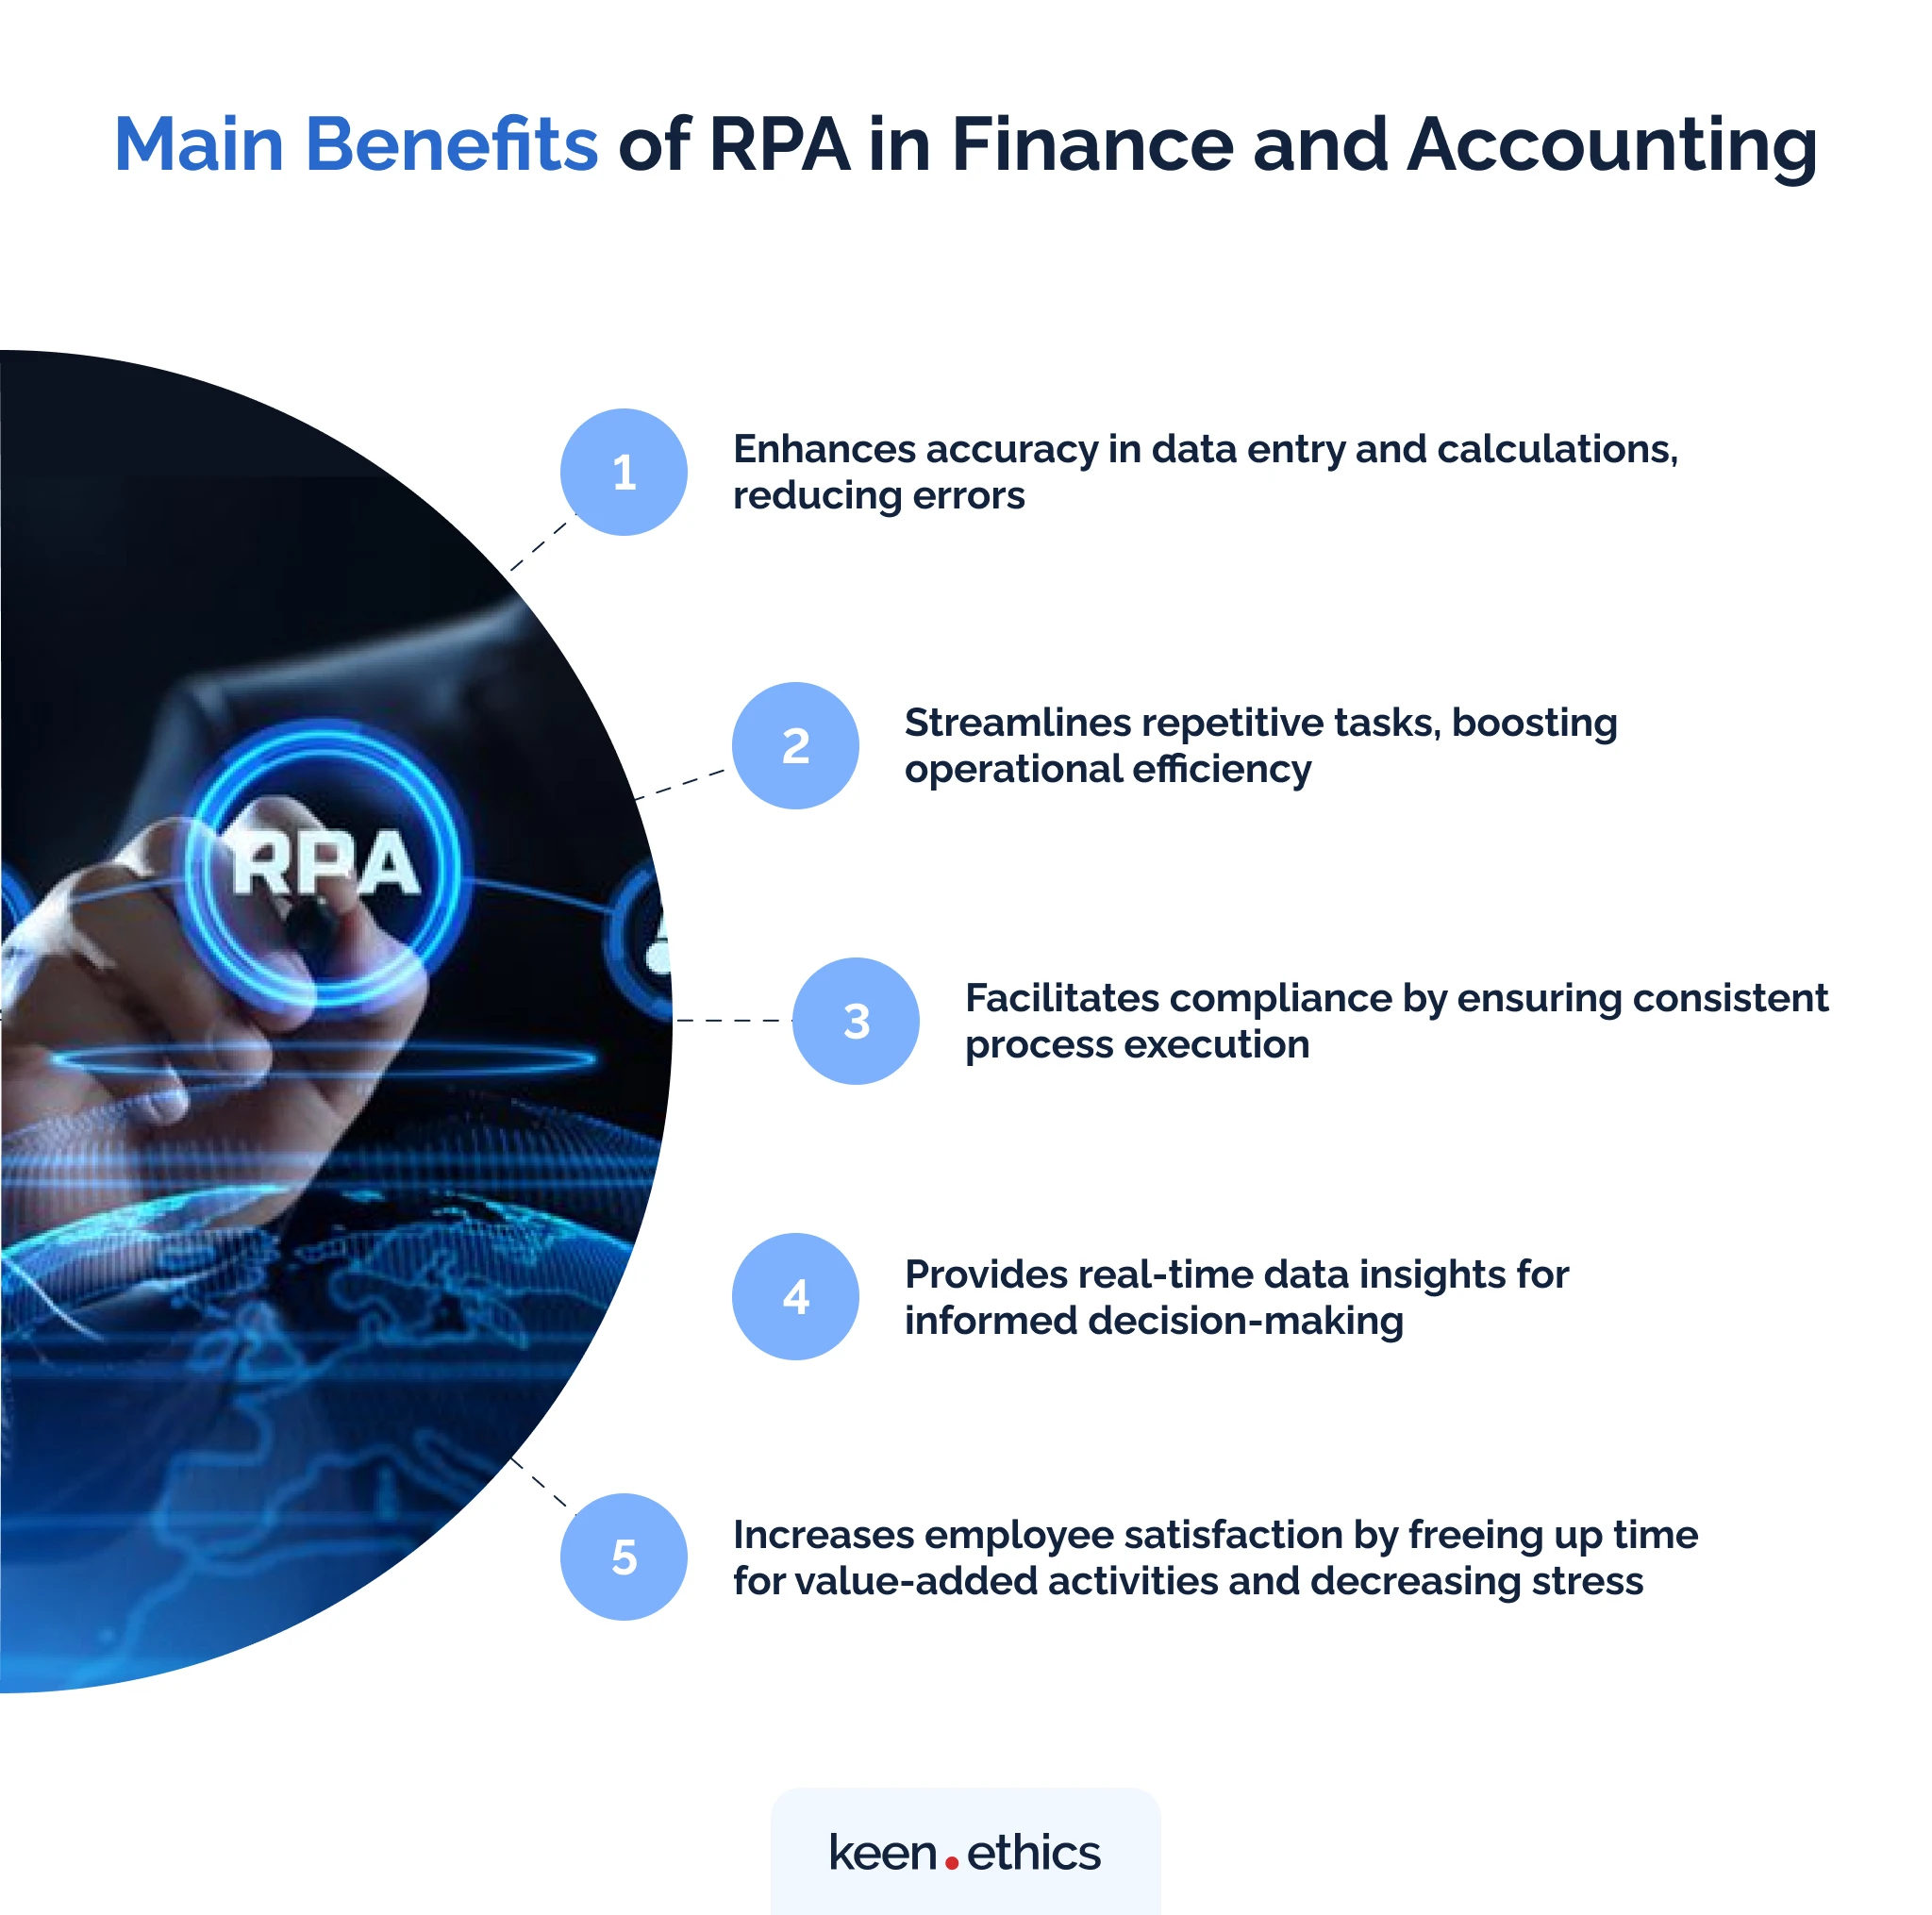 Main benefits of RPA in finance and accounting